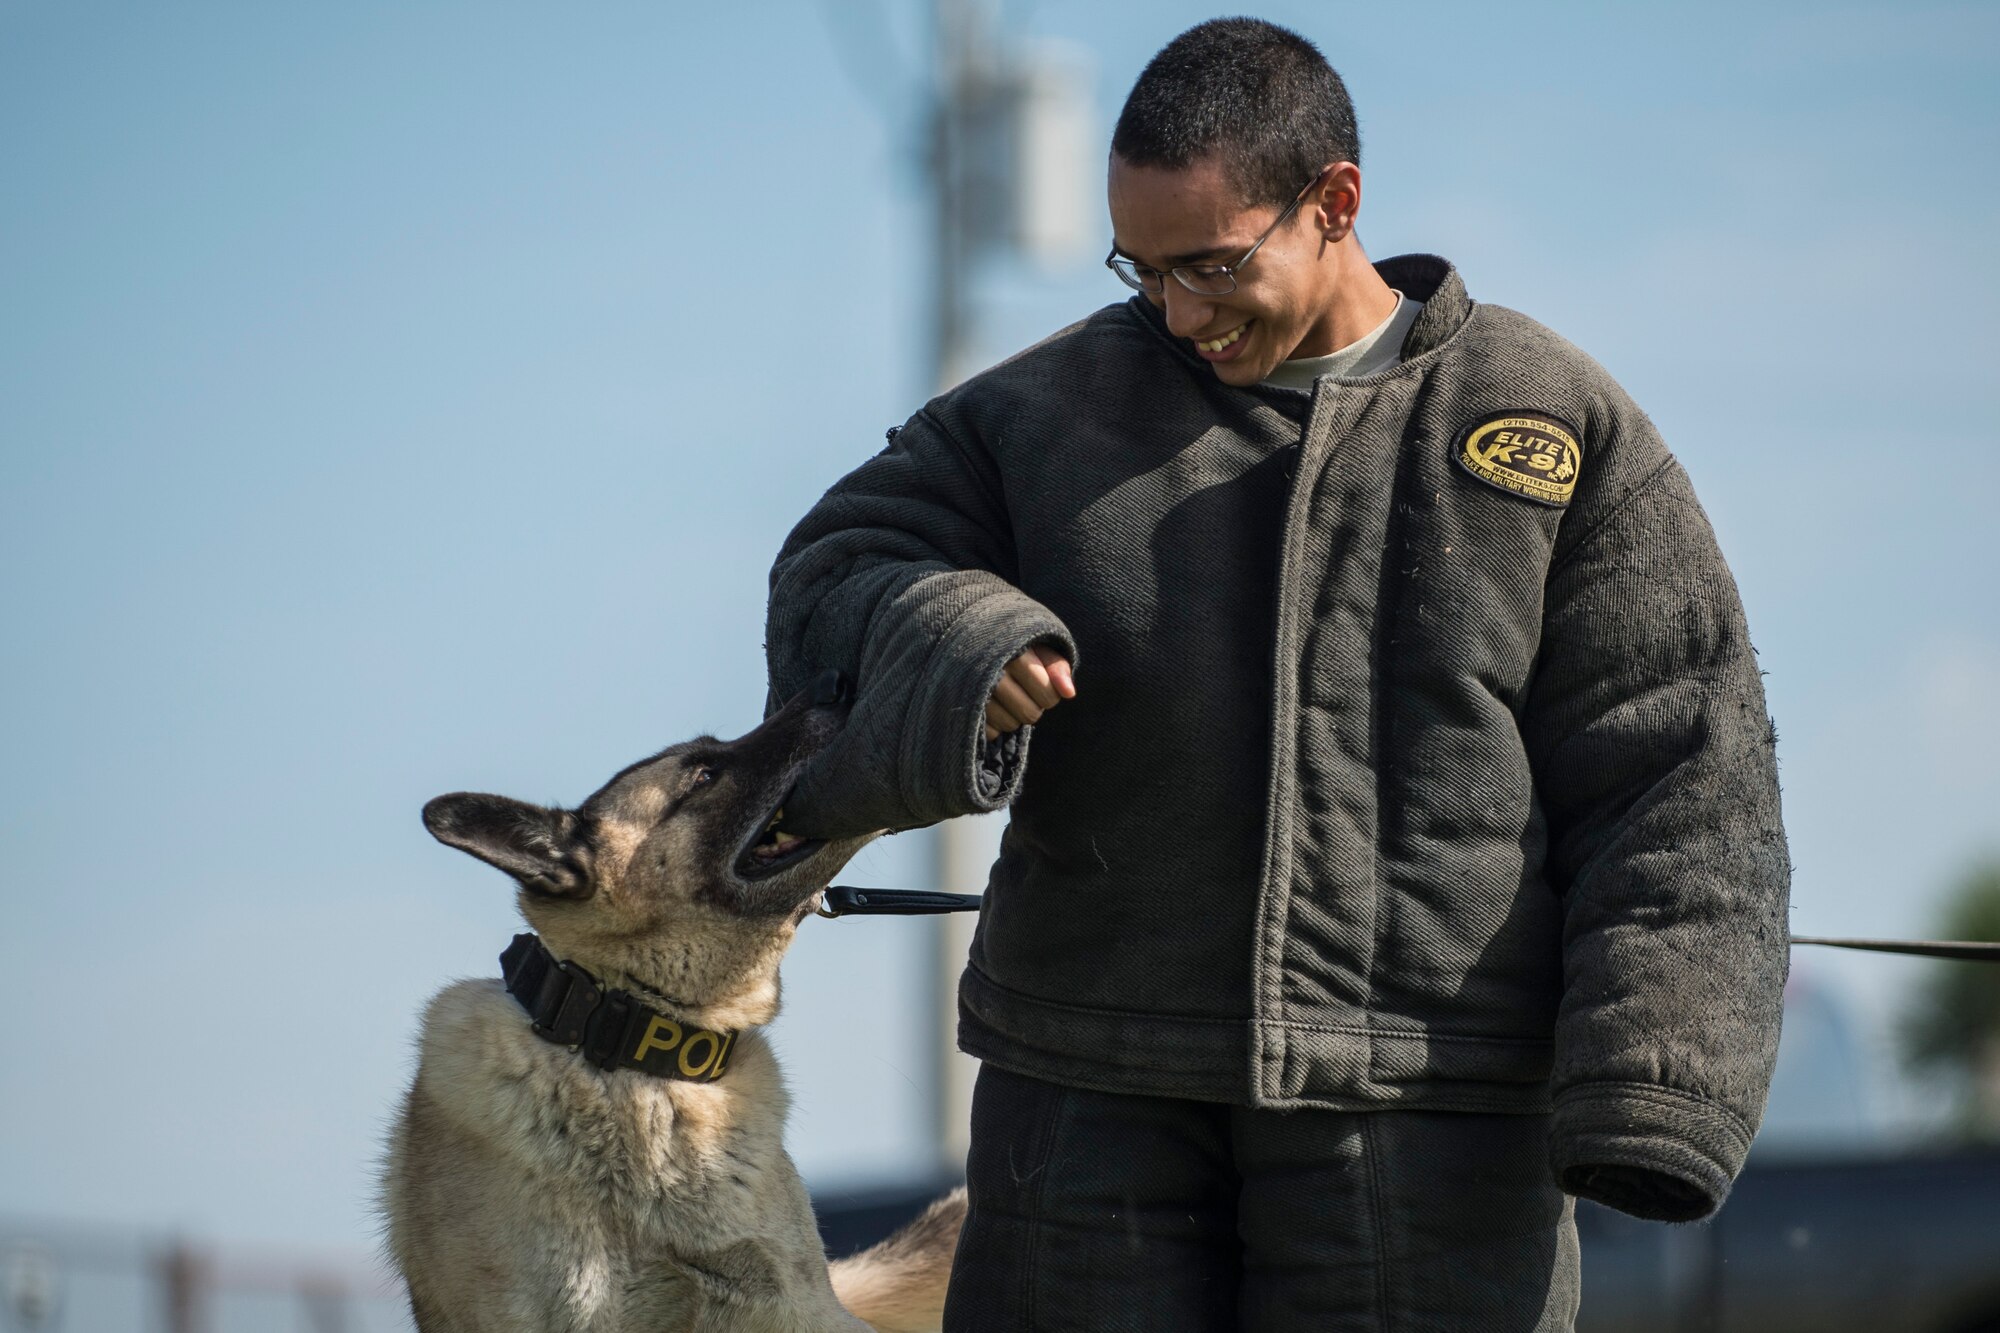 U.S. Air Force Airman 1st Class Jose Torres, a customer service technician assigned to the 6th Force Support Squadron, receives a training bite from military working dog Jecky at MacDill Air Force Base, Fla., Sept. 21, 2017.